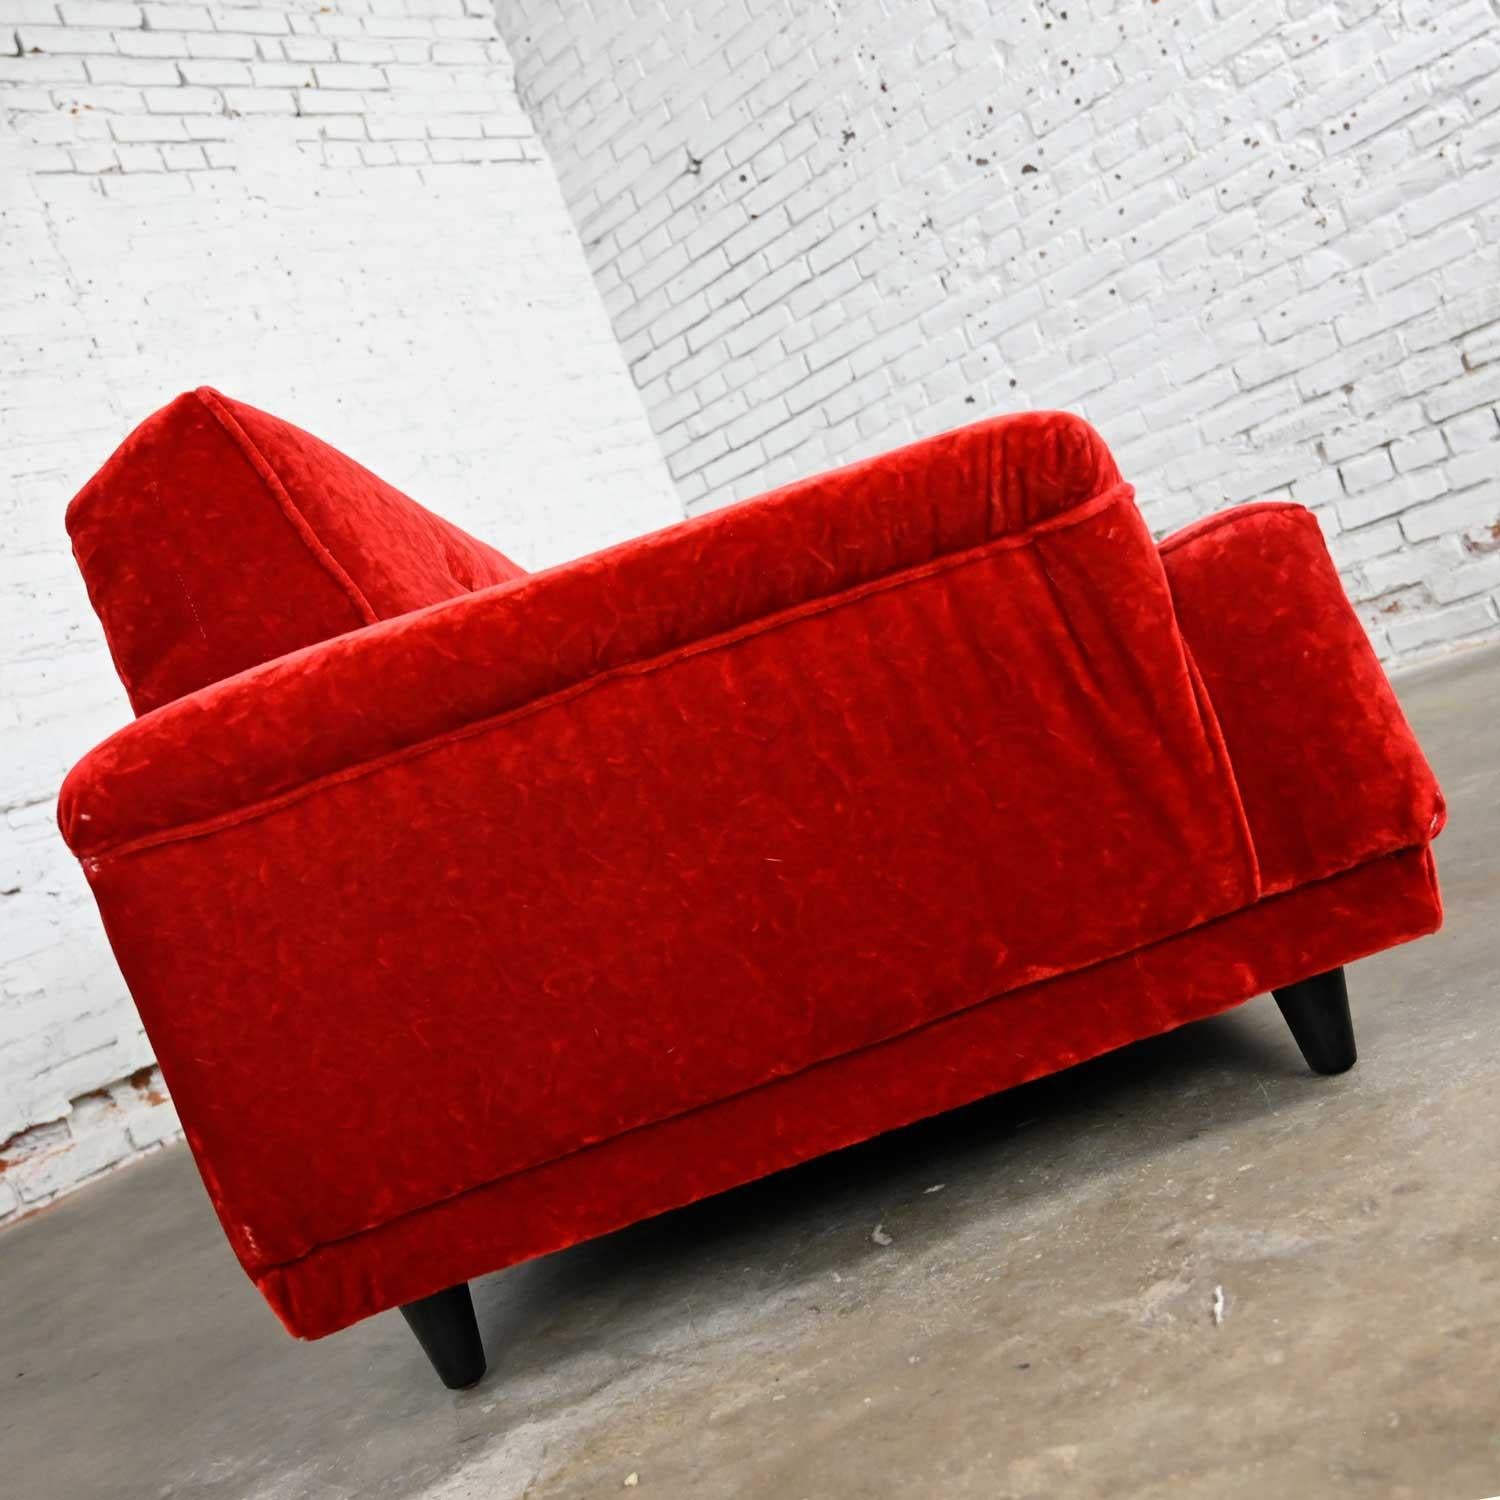 Unknown Mid Century Hollywood Regency Art Deco Style Crushed Red Velvet Chaise Lounge